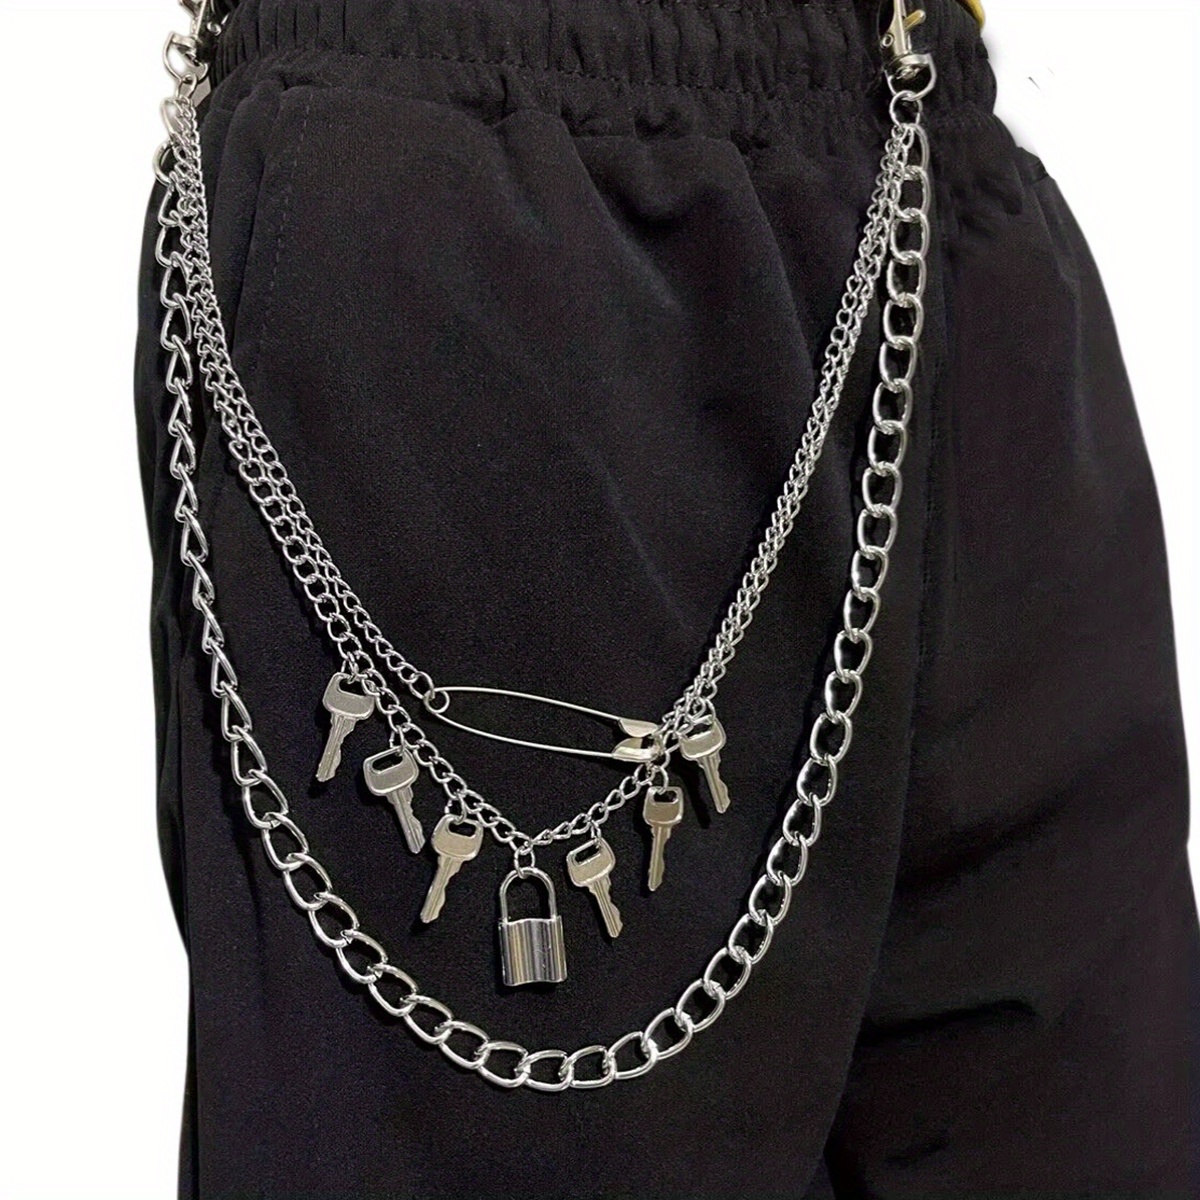 1pc New Pants Chain Fashion Men's Pants Chain Jeans Chain Punk Hip Hop  Pants Chain Waist Chain, Ideal choice for Gifts